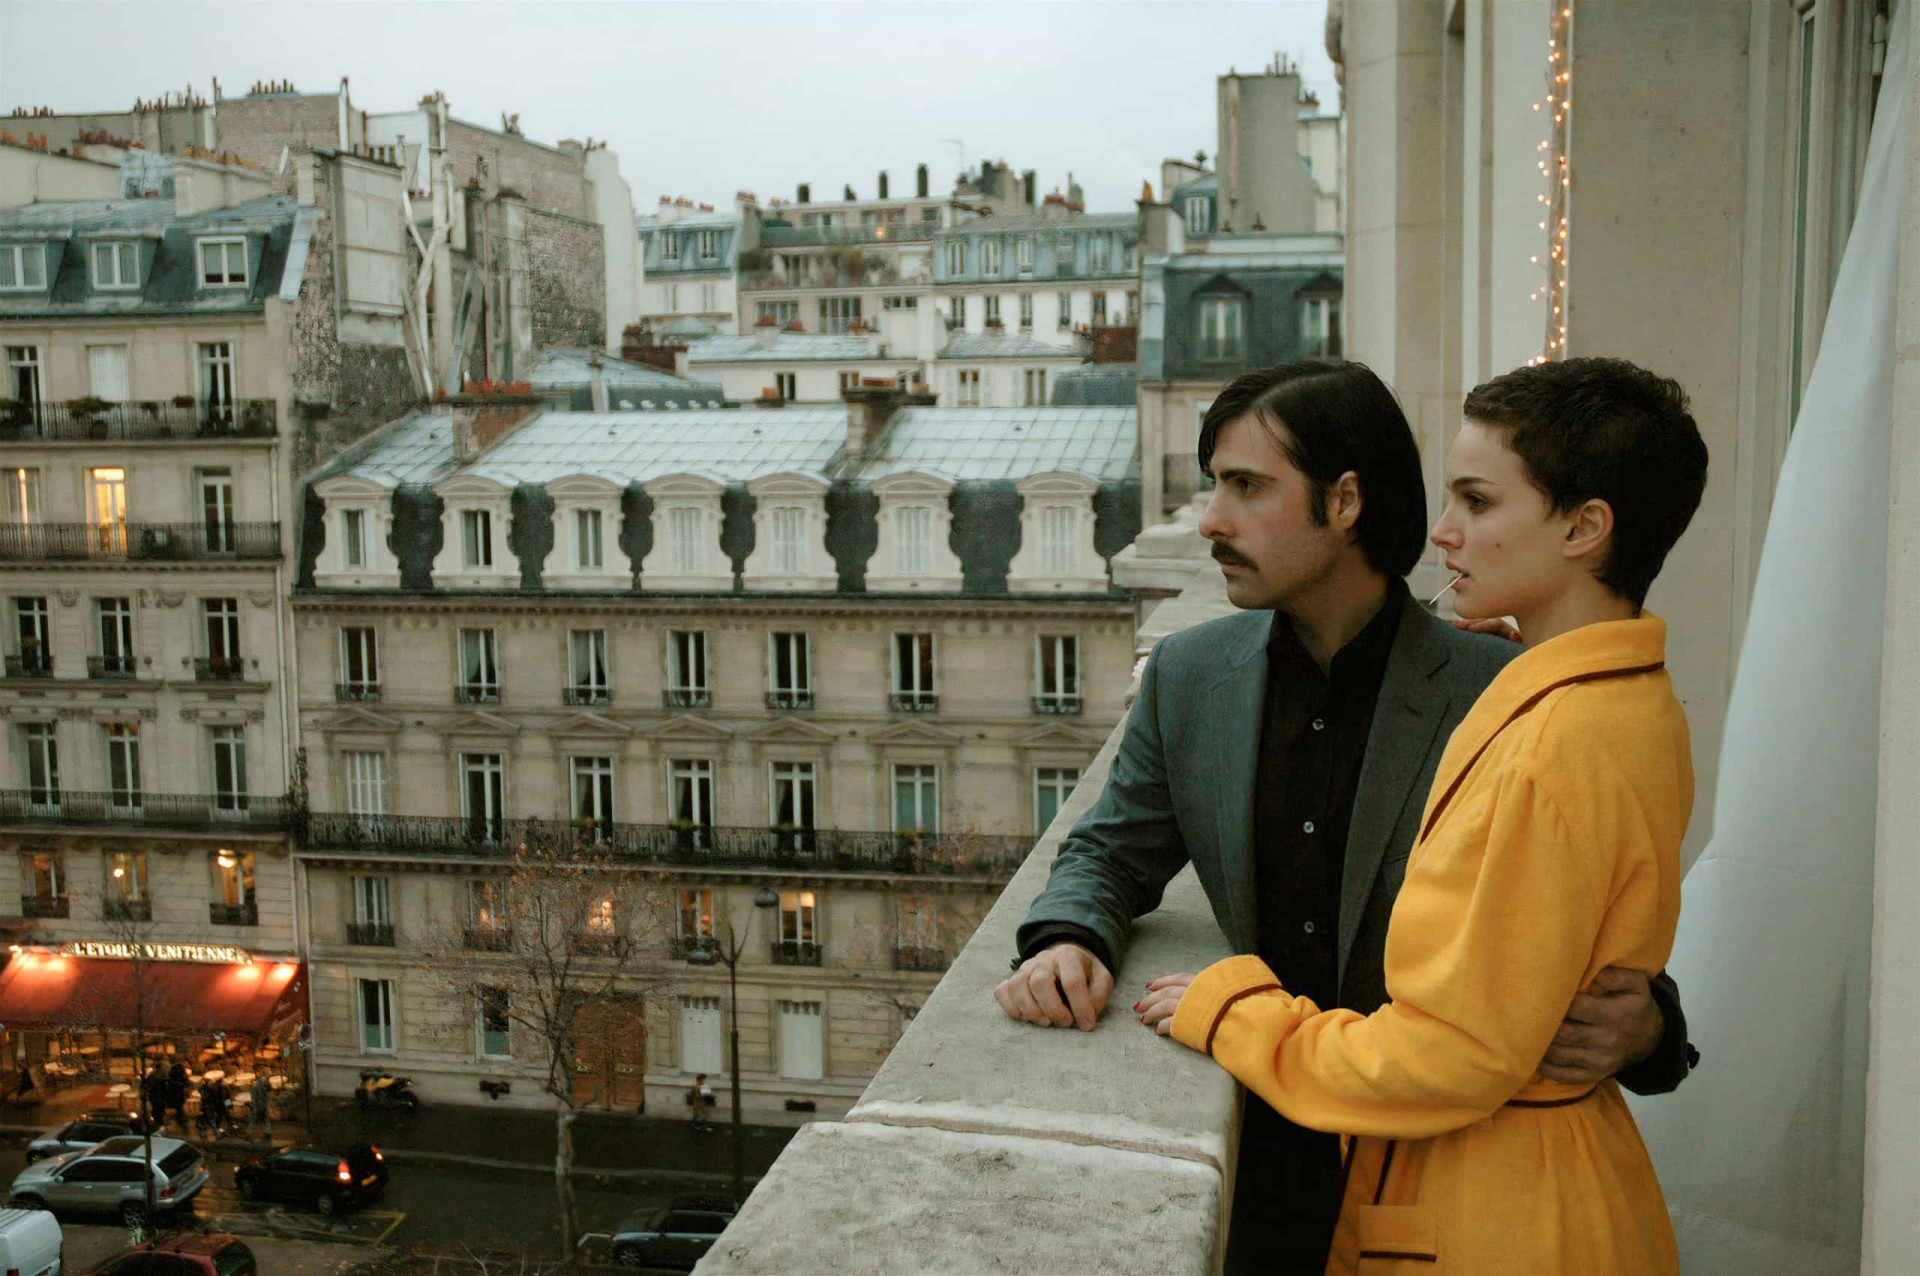 <p>Wes Anderson wrote and directed this short film as a prequel to his other film 'The Darjeeling Limited' (2007). Natalie Portman and Jason Schwartzman star in this quirky story of love and tragedy.</p><p>You may also like:<a href="https://www.starsinsider.com/n/495271?utm_source=msn.com&utm_medium=display&utm_campaign=referral_description&utm_content=458166v3en-us"> What does the Bible say about war?</a></p>